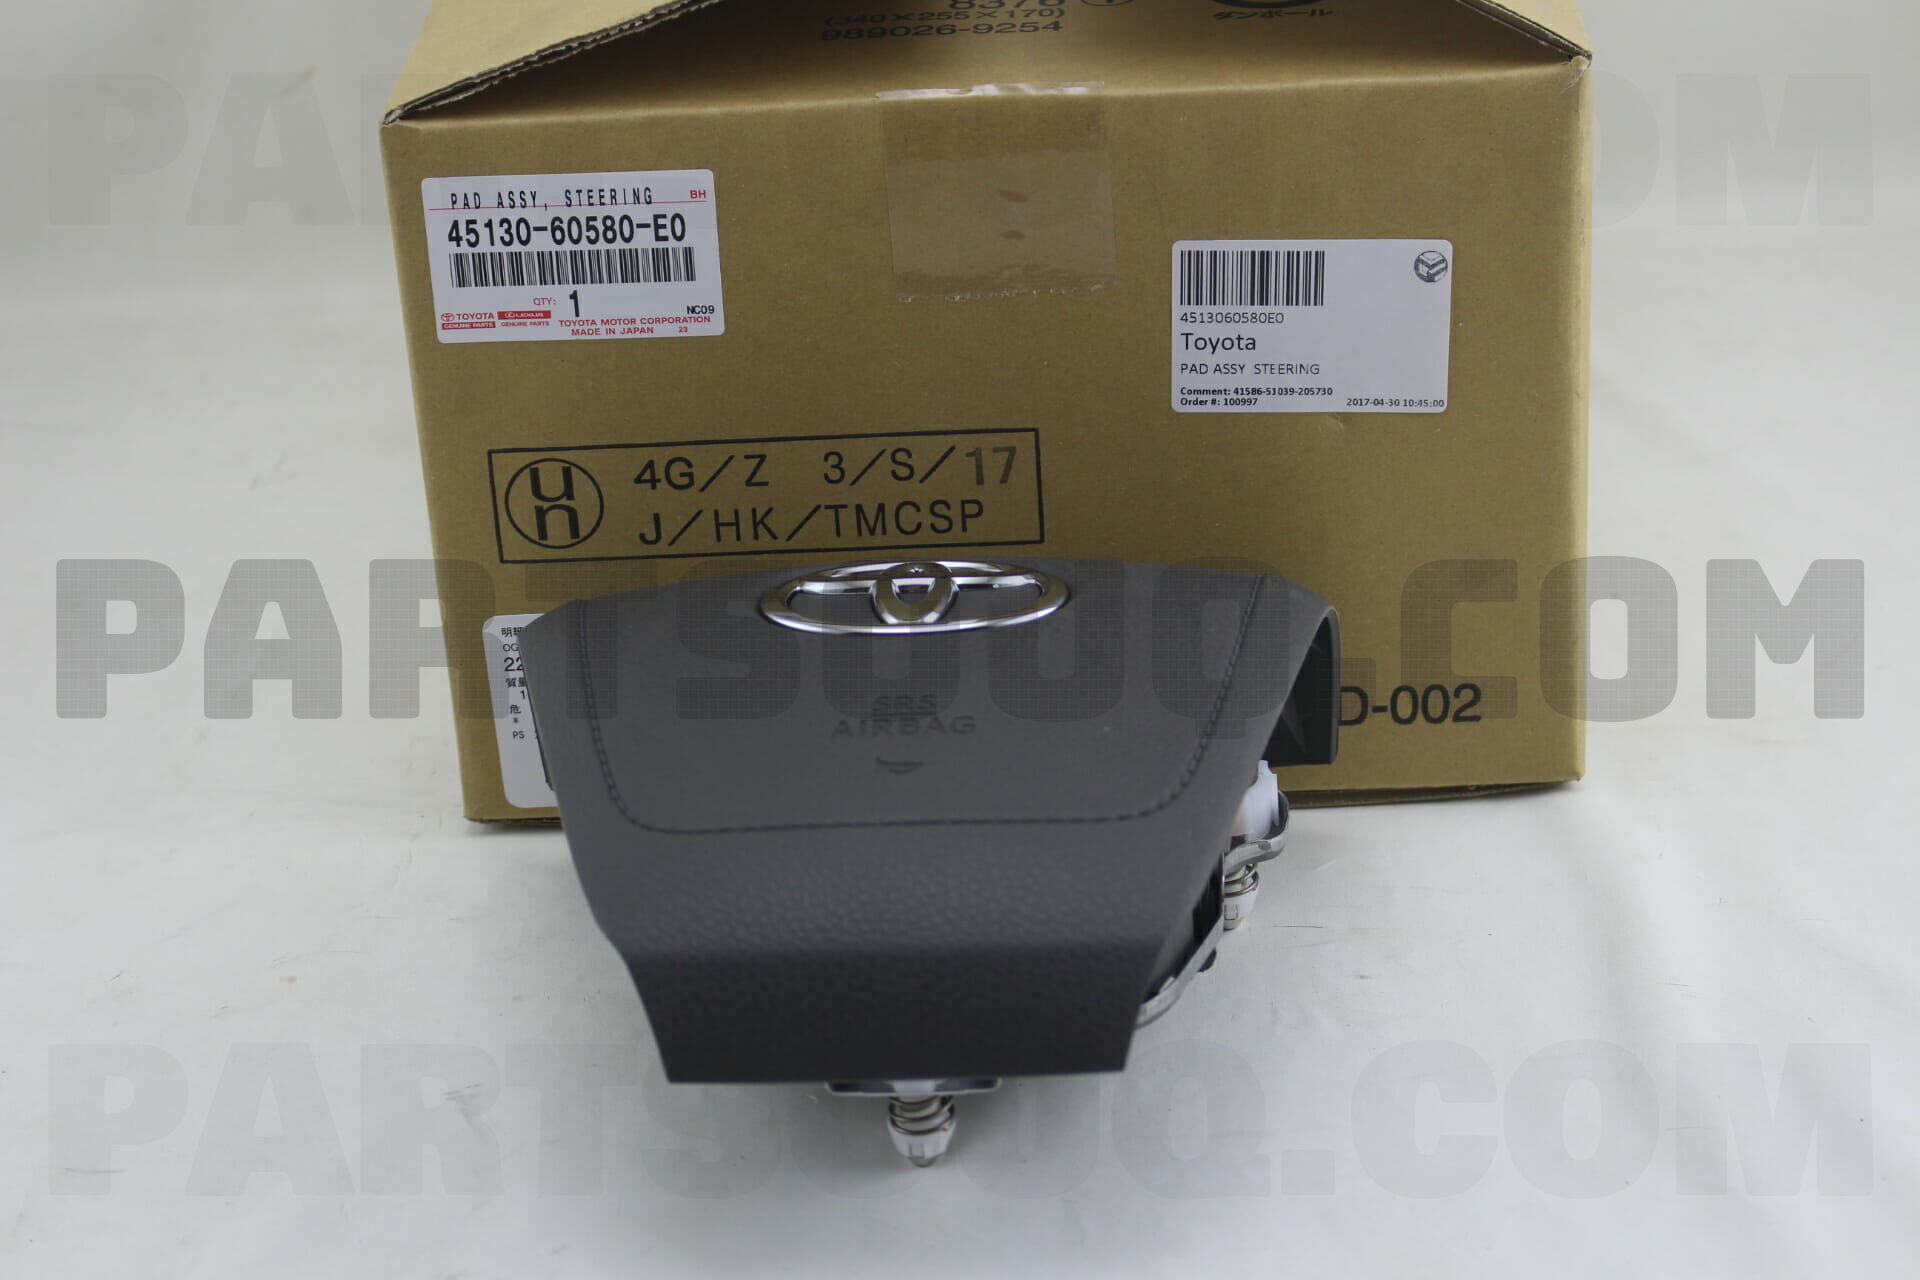 PAD ASSY STEERING 4513060580E0 | Toyota Parts | PartSouq